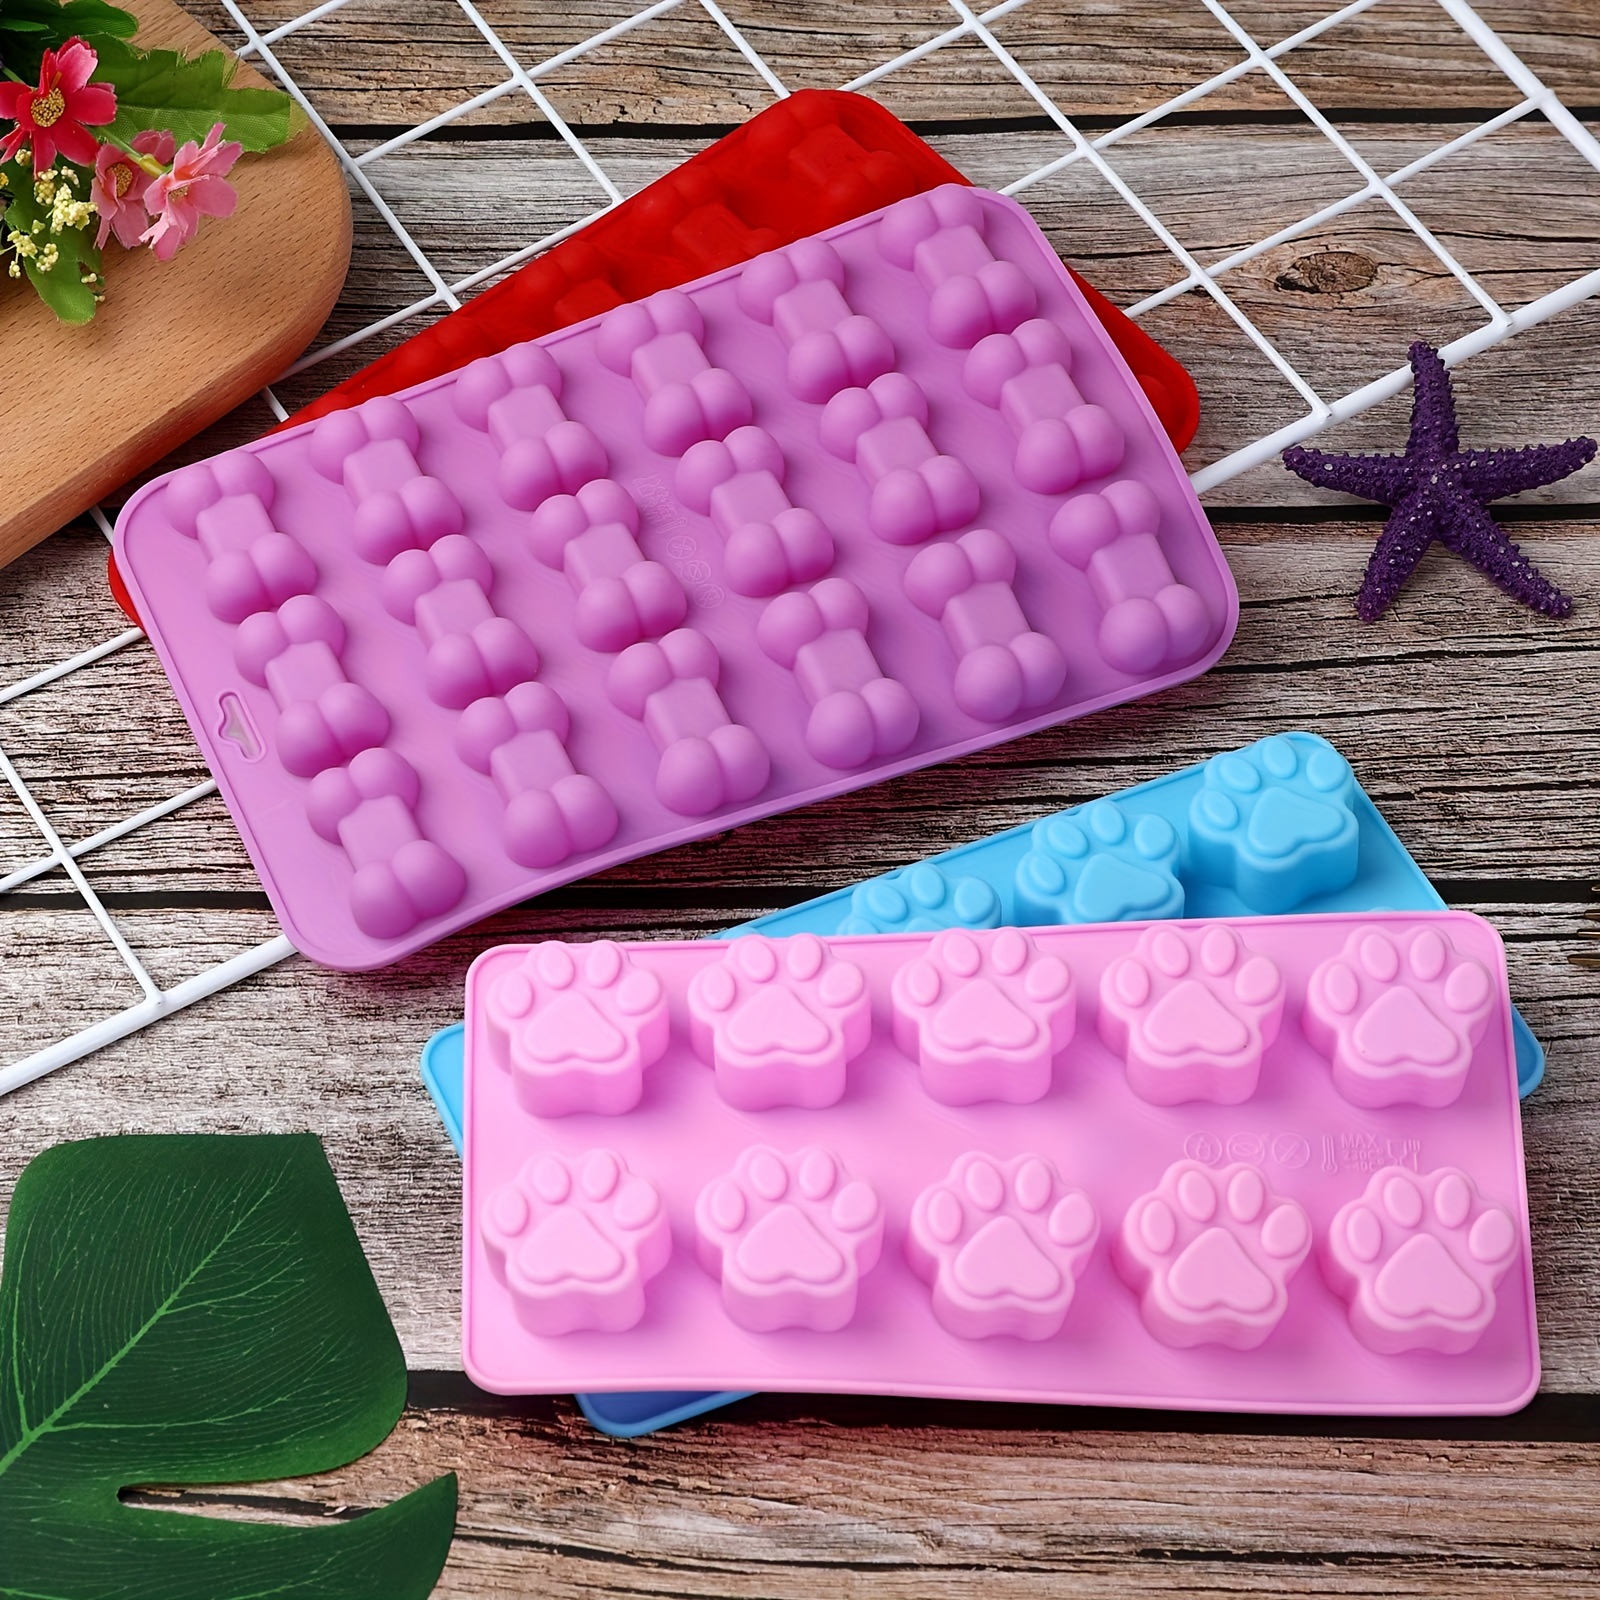  Dog treat baking mold Silicone Molds for Chocolate, Candy,  Jelly, Ice Cube dog treat silicone baking molds Dog Paw and Bone Silicone  Molds (Blue,Pink) : Pet Supplies